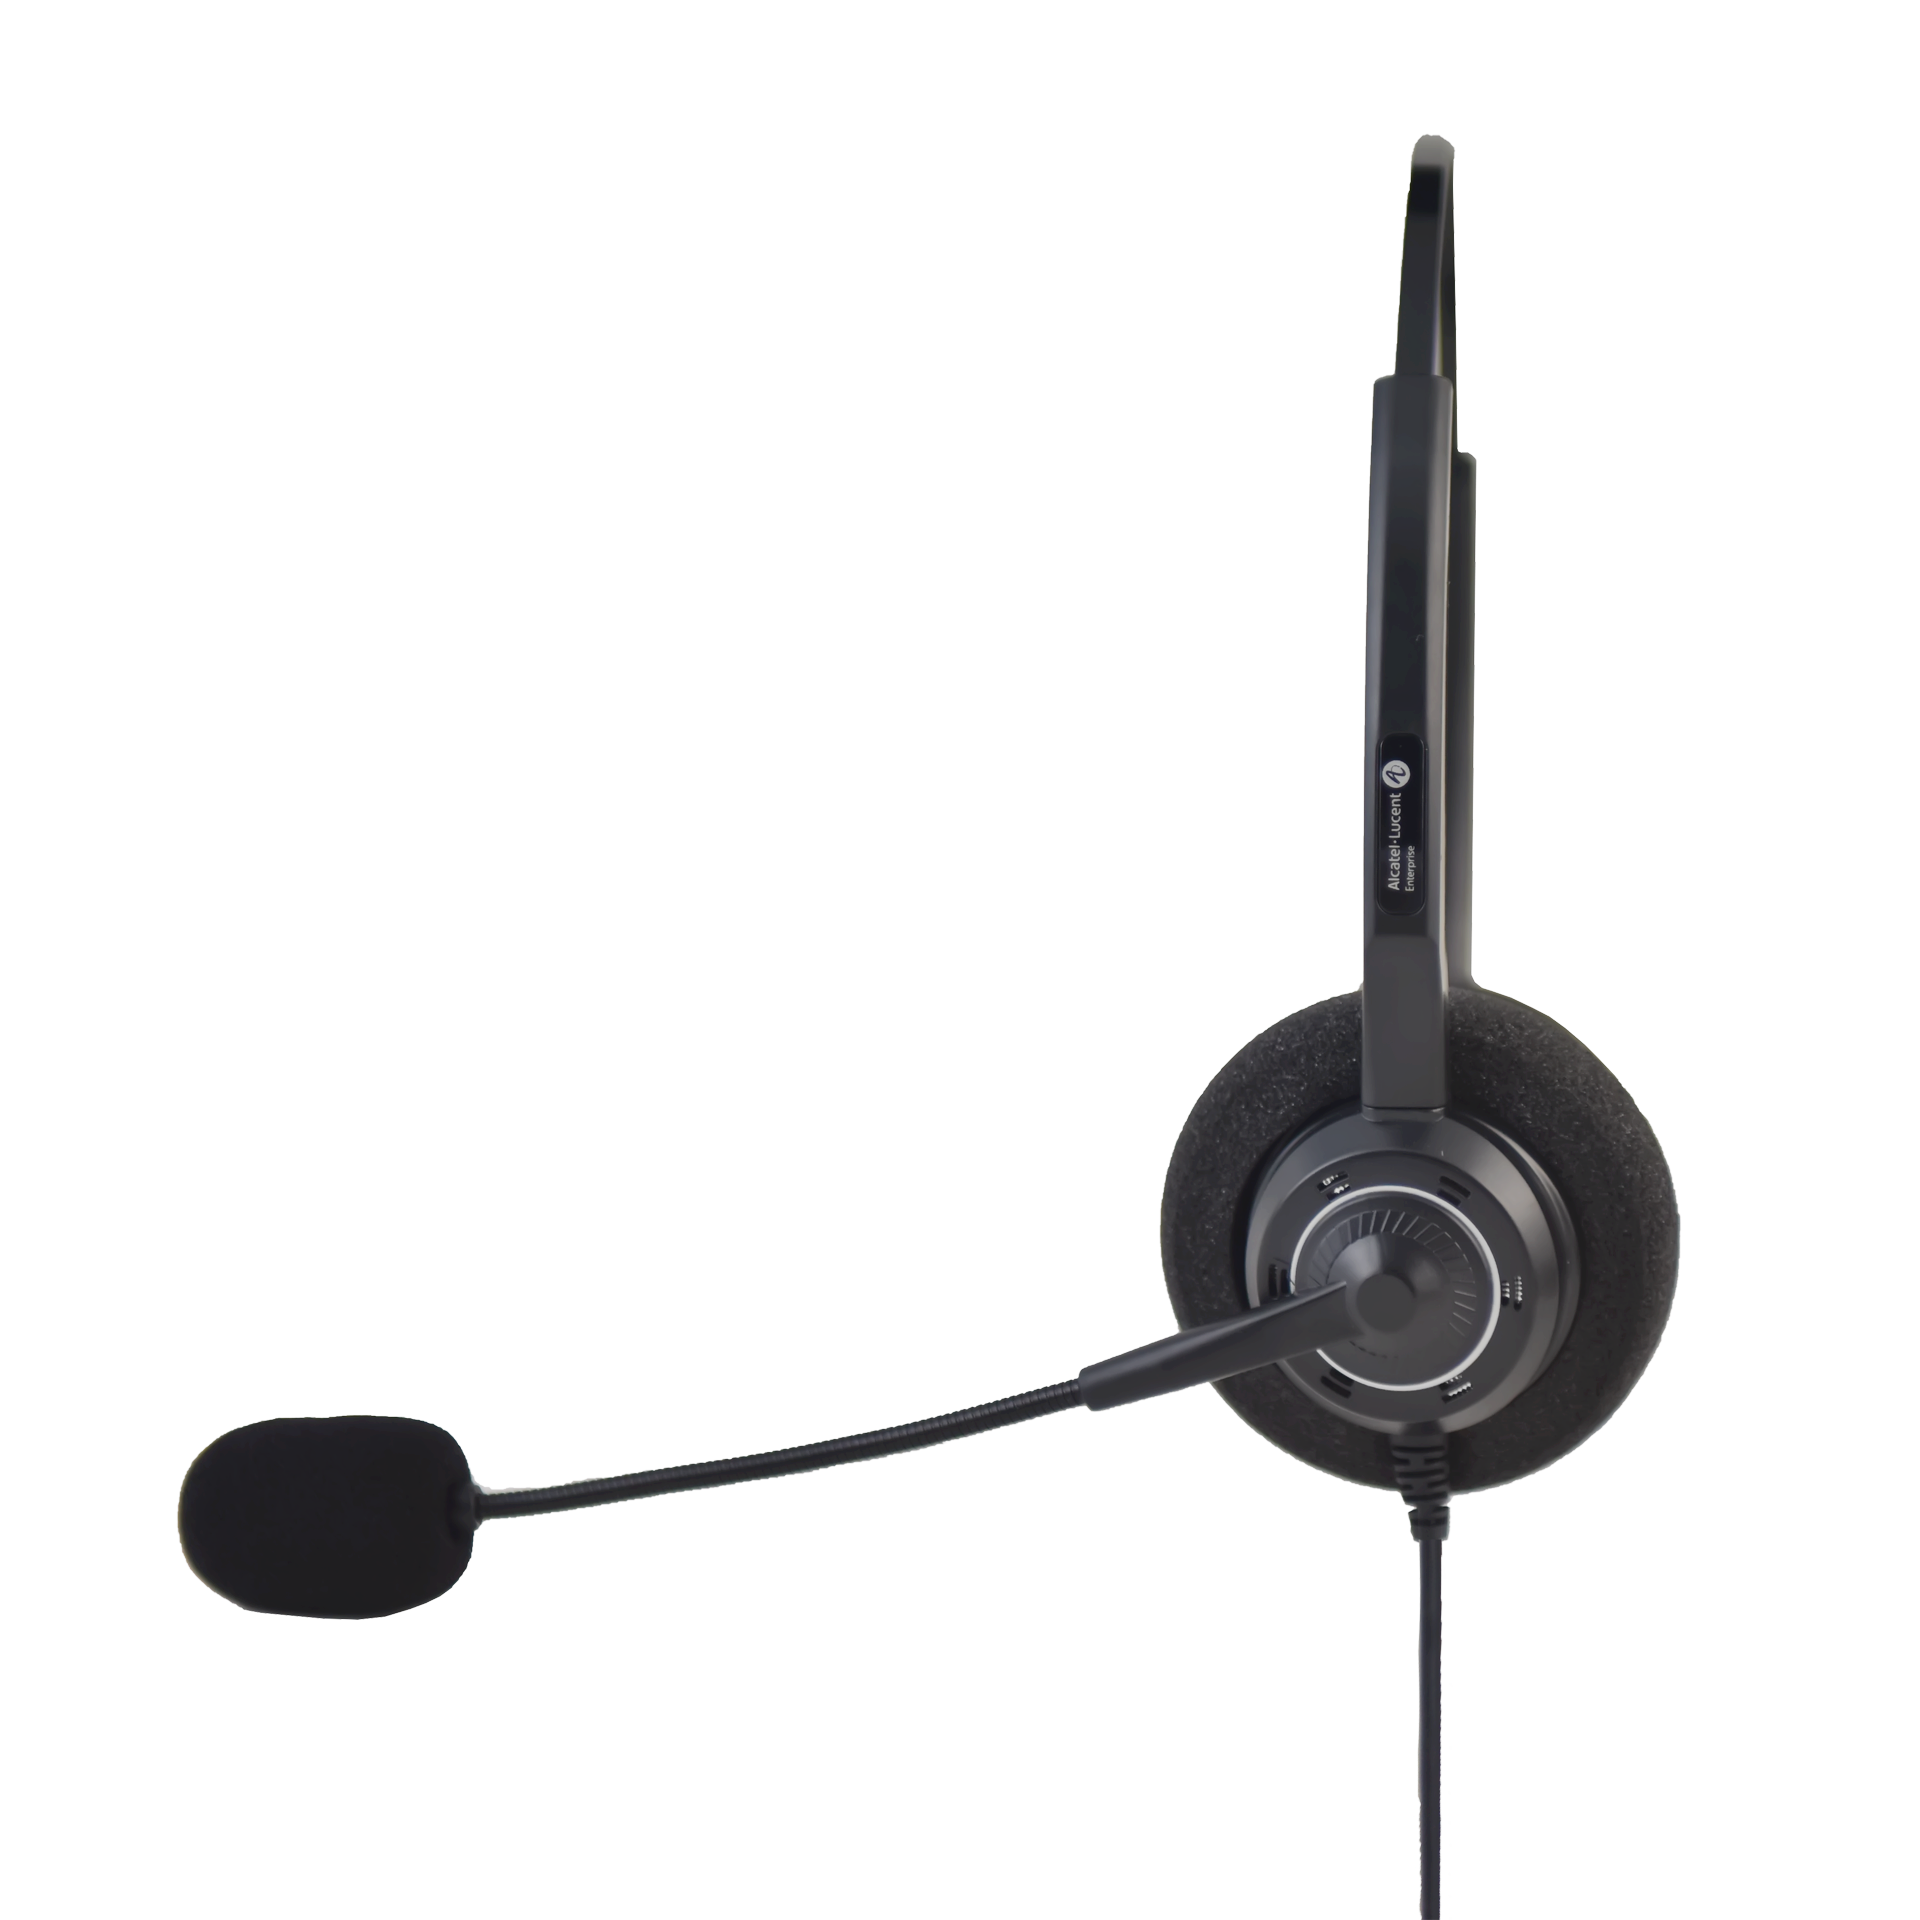 Noise Cancelling Microphone Flexible Microphone Boom General Communication Softwares AH 11 U Professional USB Headset